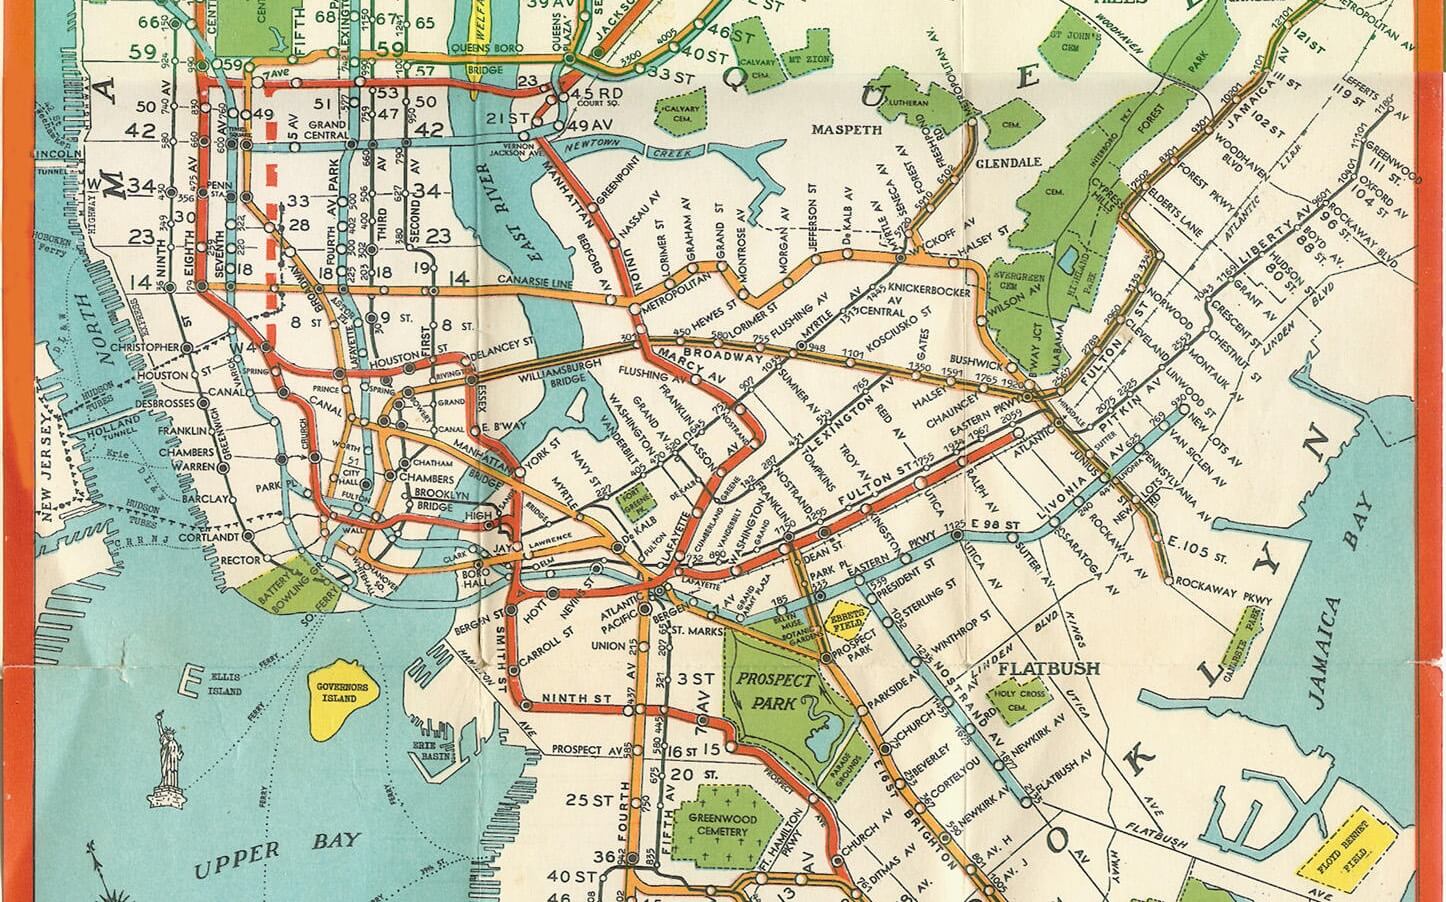 The subway map for the last year there were 1.75 billion riders.